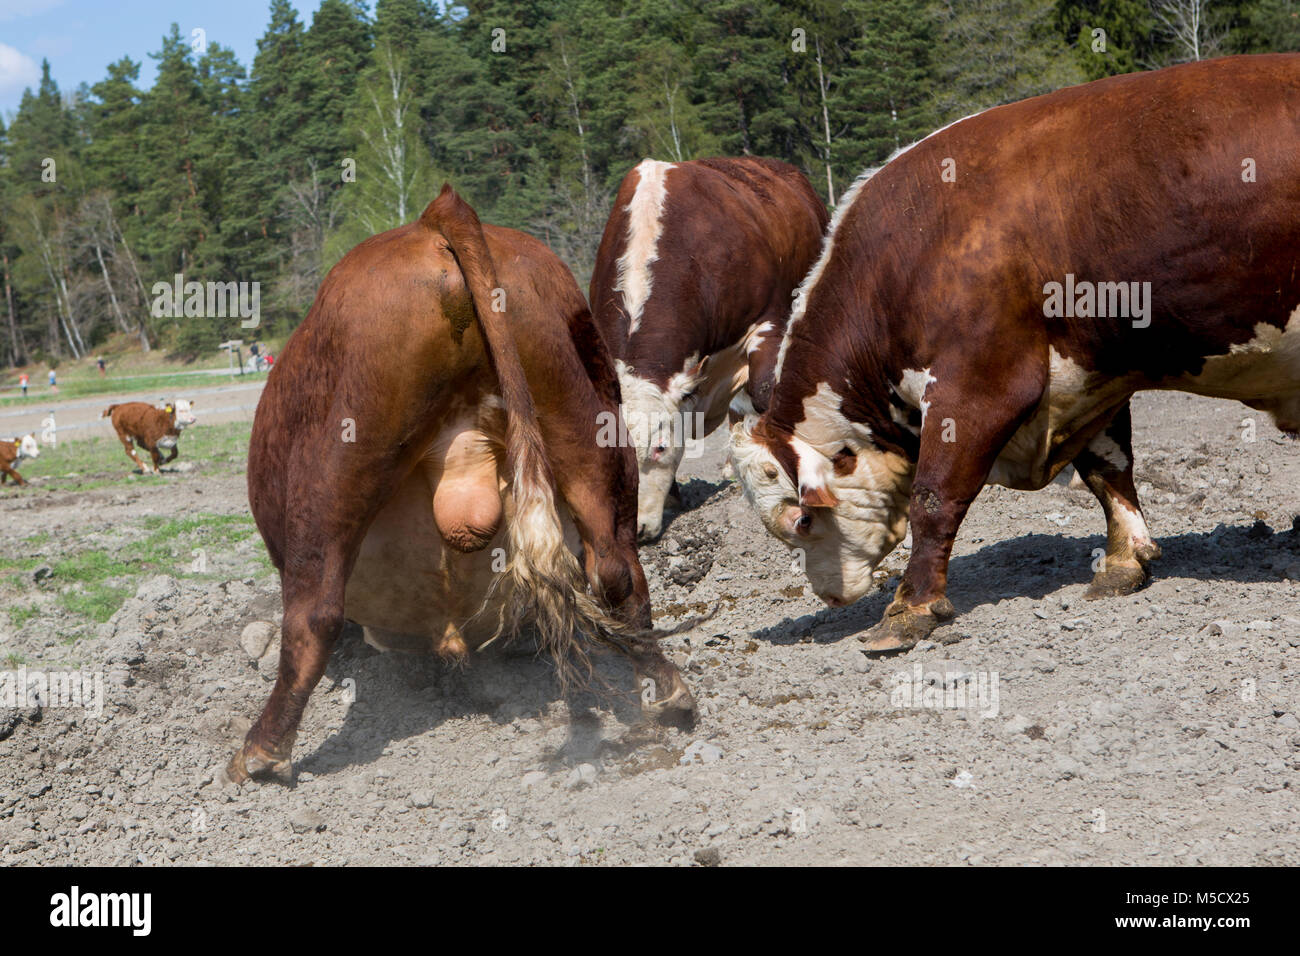 Cows are released on springtime at Bögs gård, Sollentuna, Sweden. Stock Photo